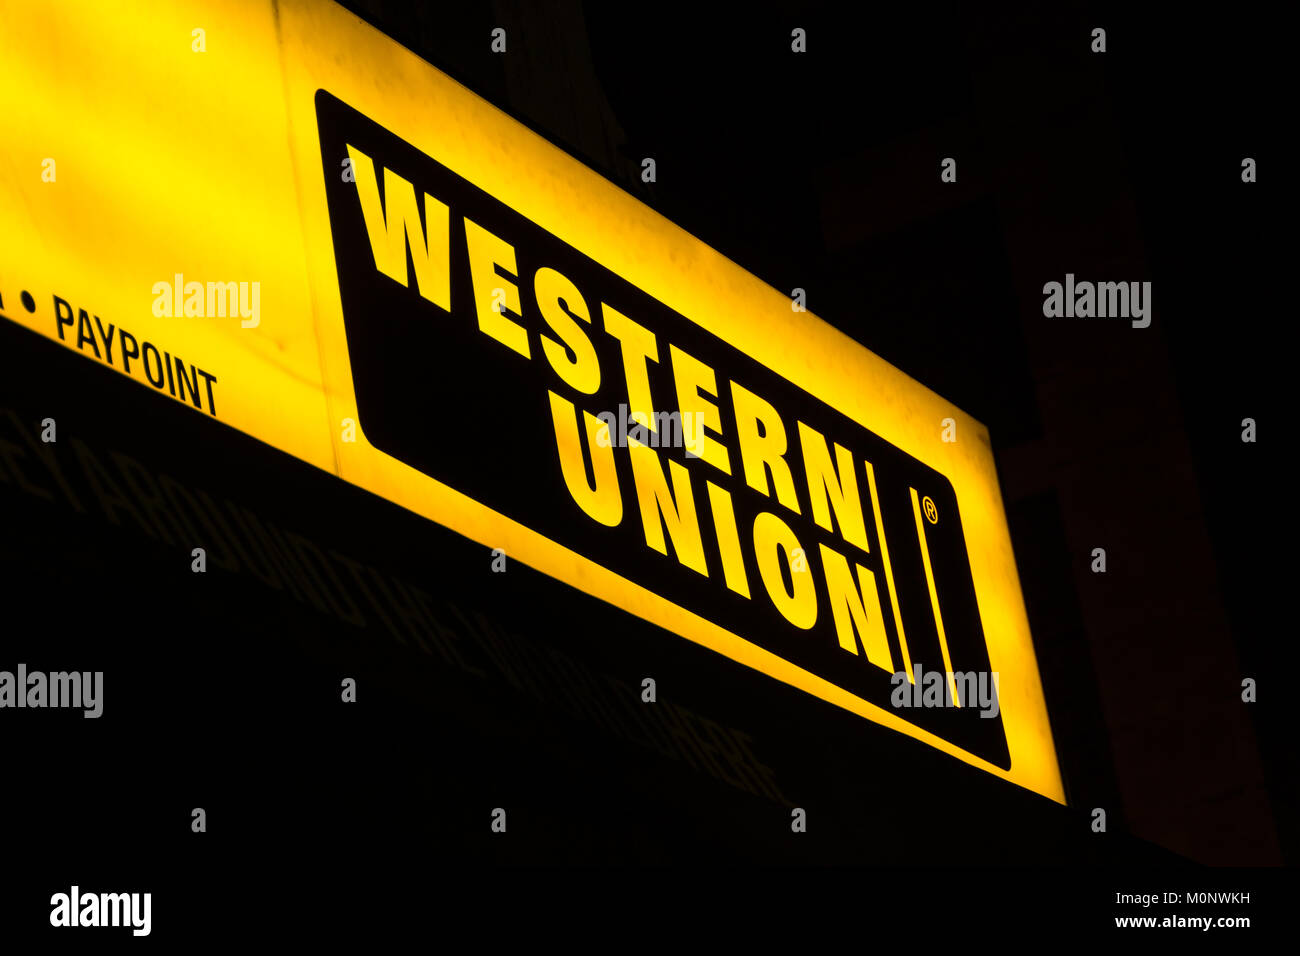 Western Union Money Transfer and paypoint signage and logo at night Stock Photo